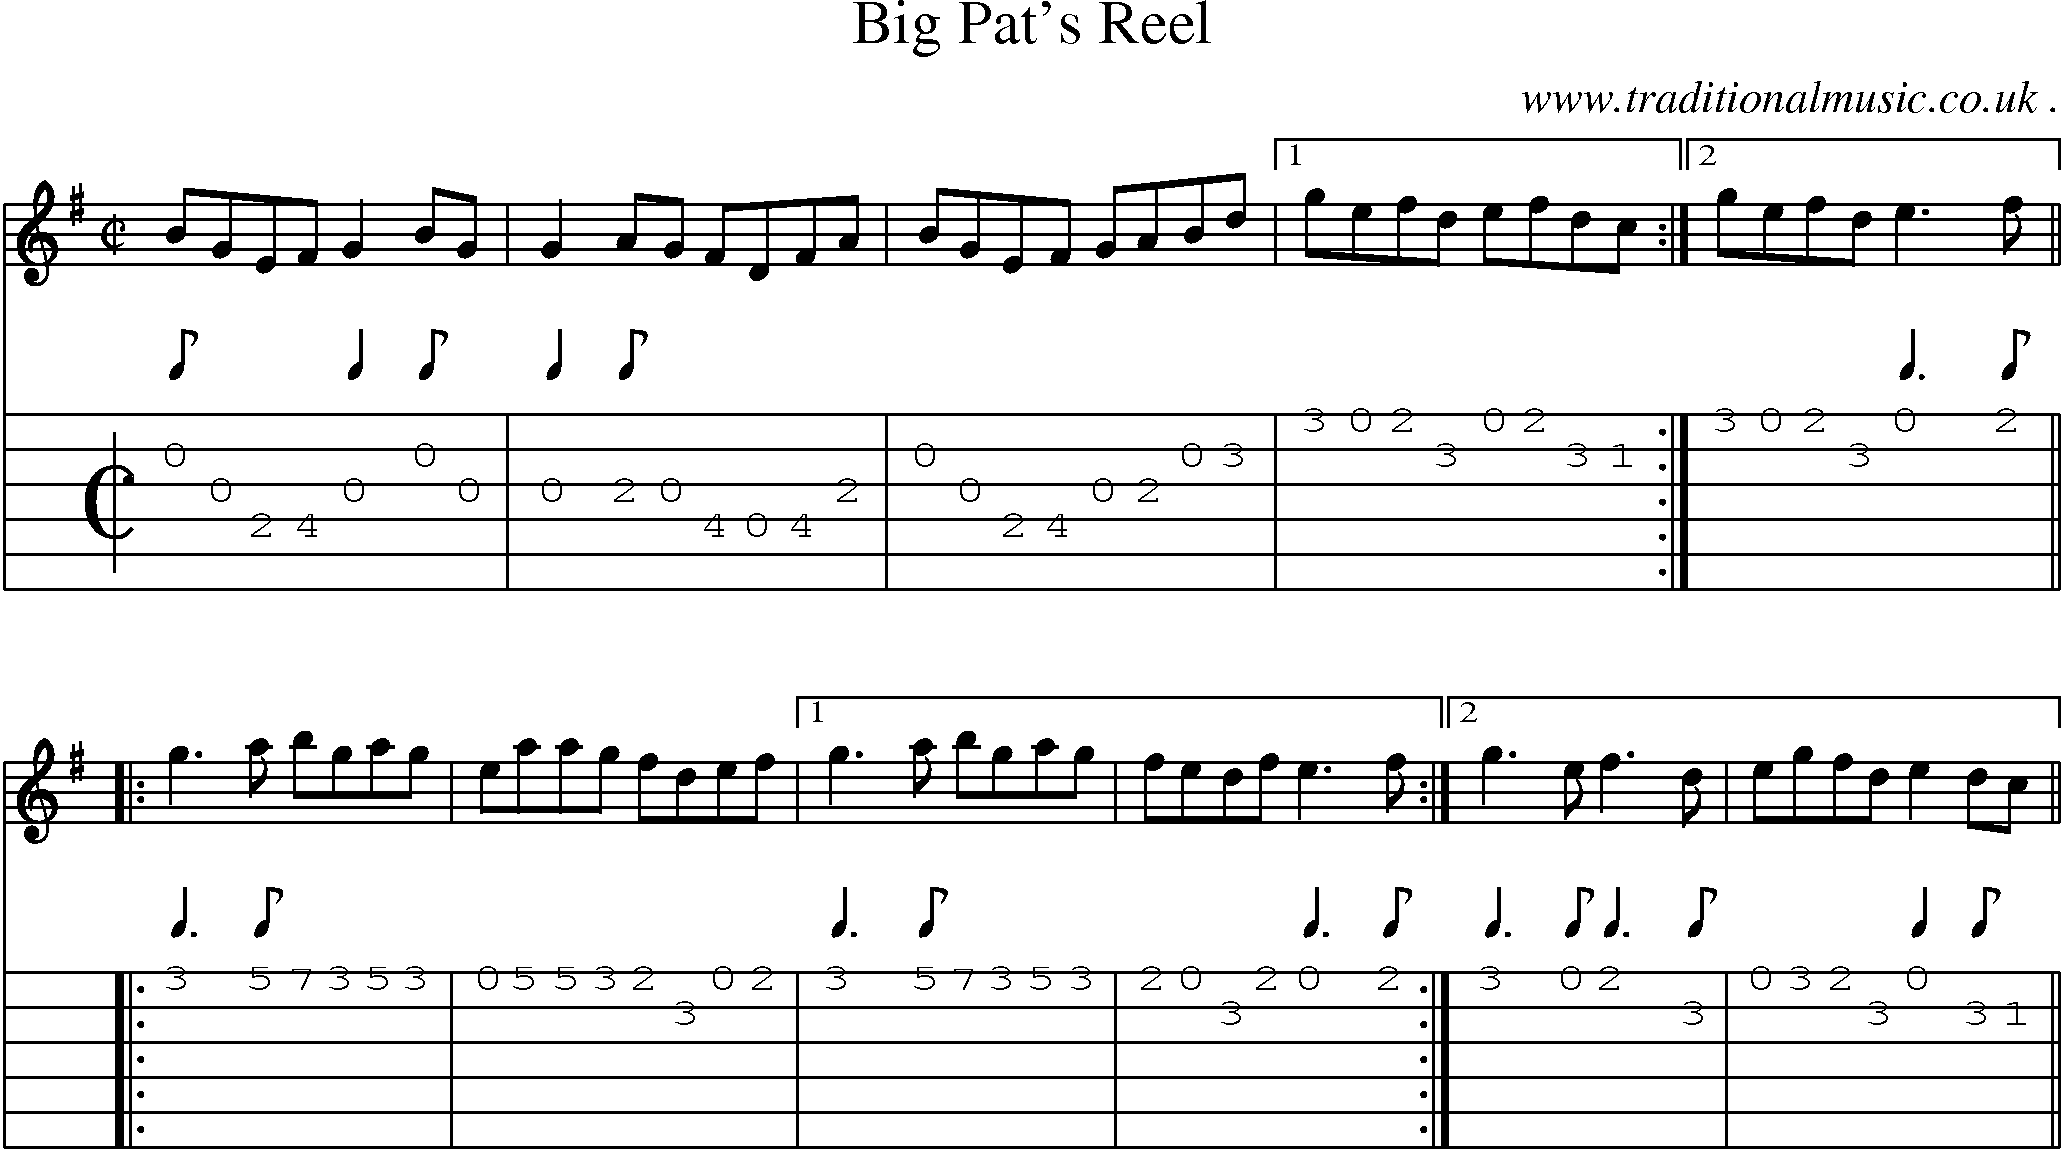 Sheet-Music and Guitar Tabs for Big Pats Reel